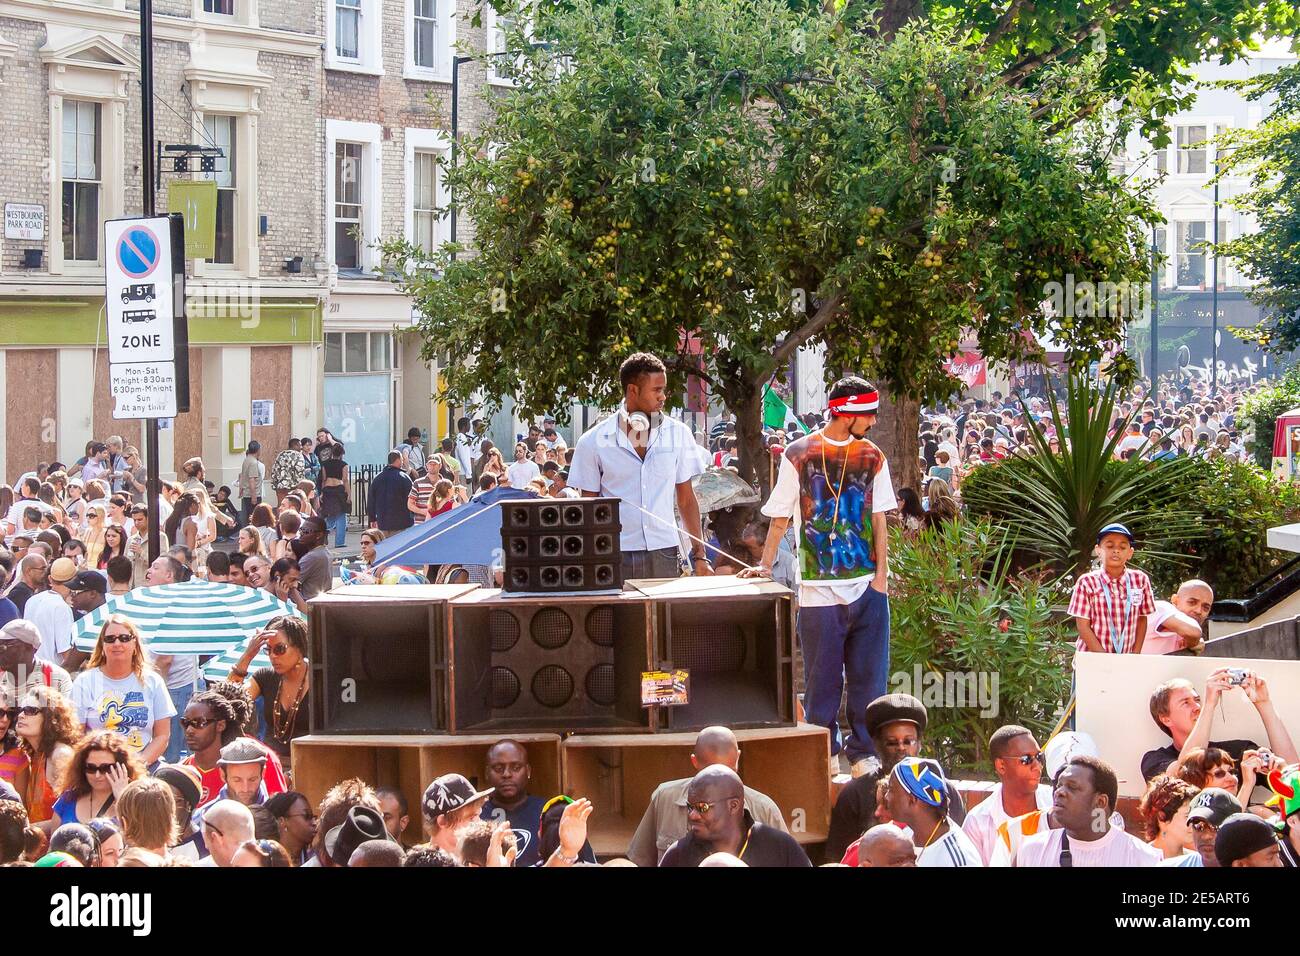 Crowds dancing at a sound system at Notting Hill Carnival, London Stock Photo